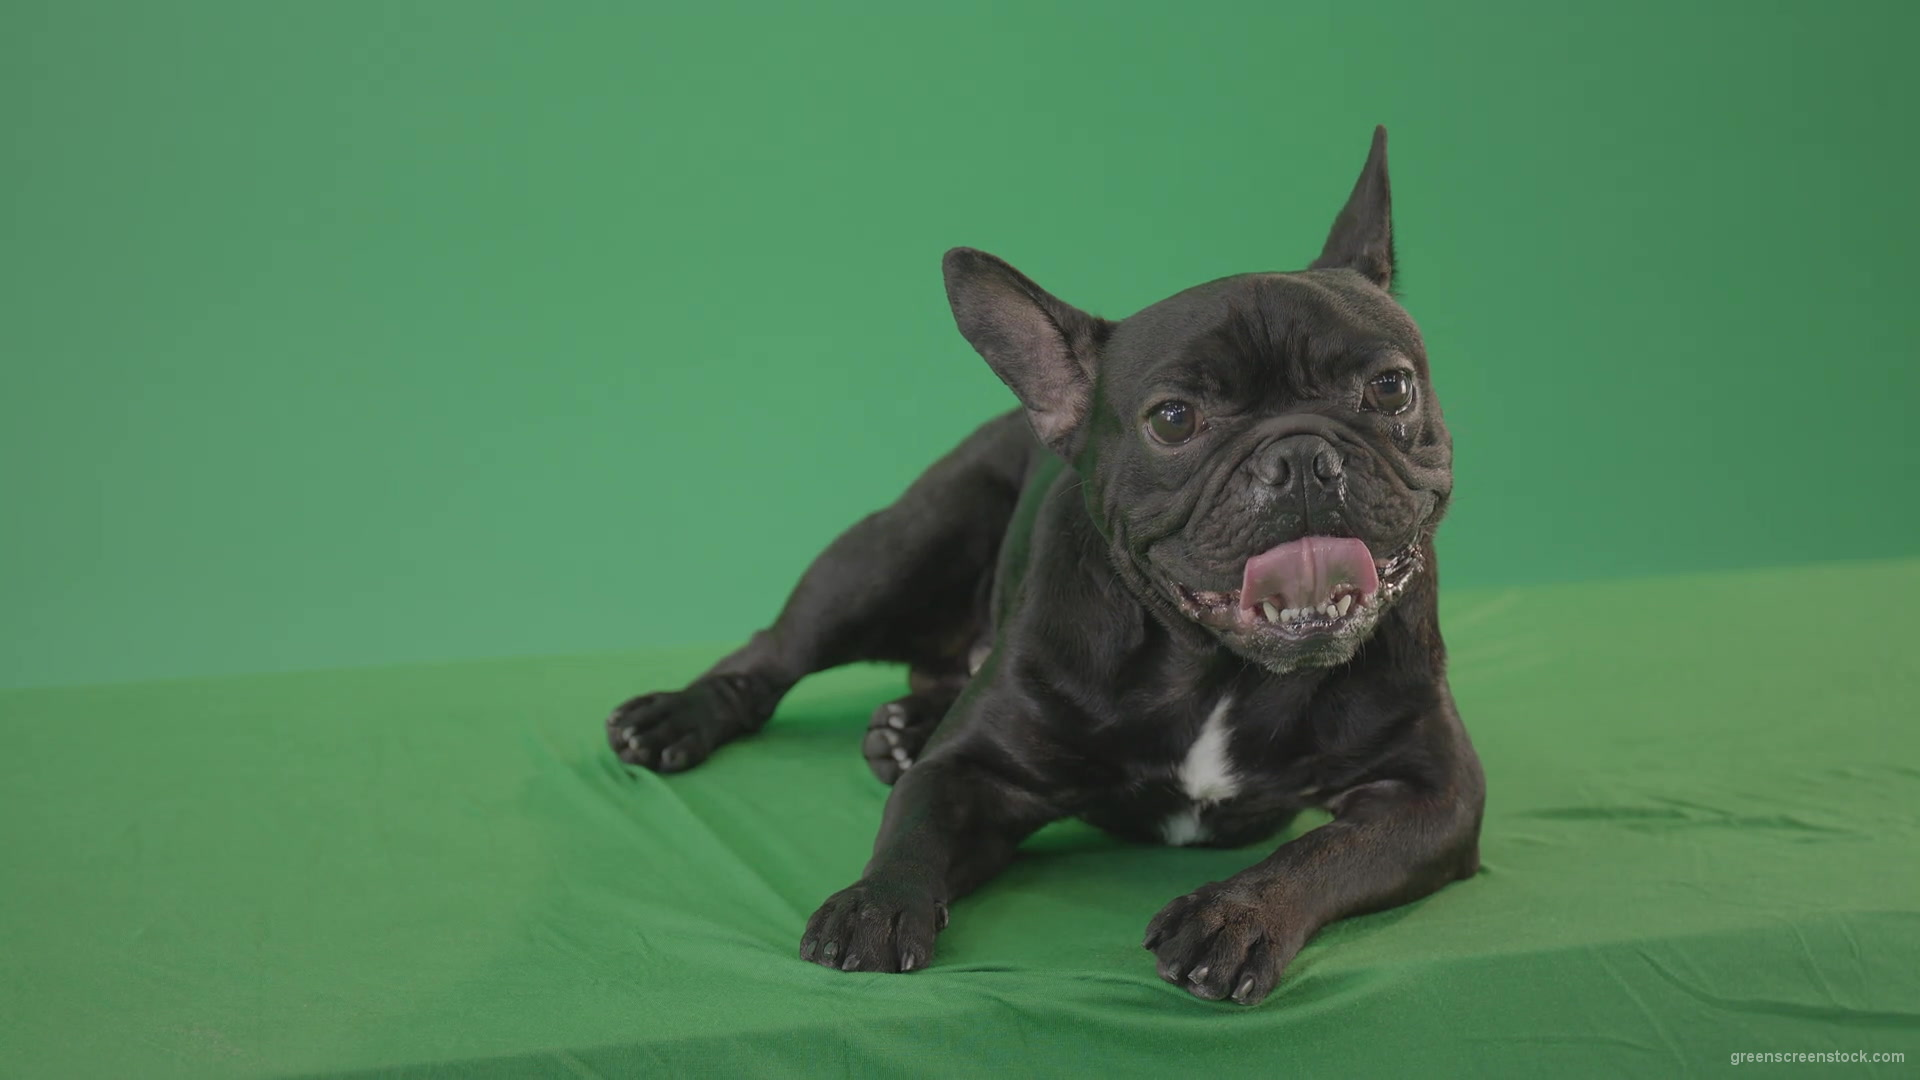 Boring-black-French-Bulldog-chilling-like-a-Bos-on-green-screen-4K-Video-Footage-1920_002 Green Screen Stock